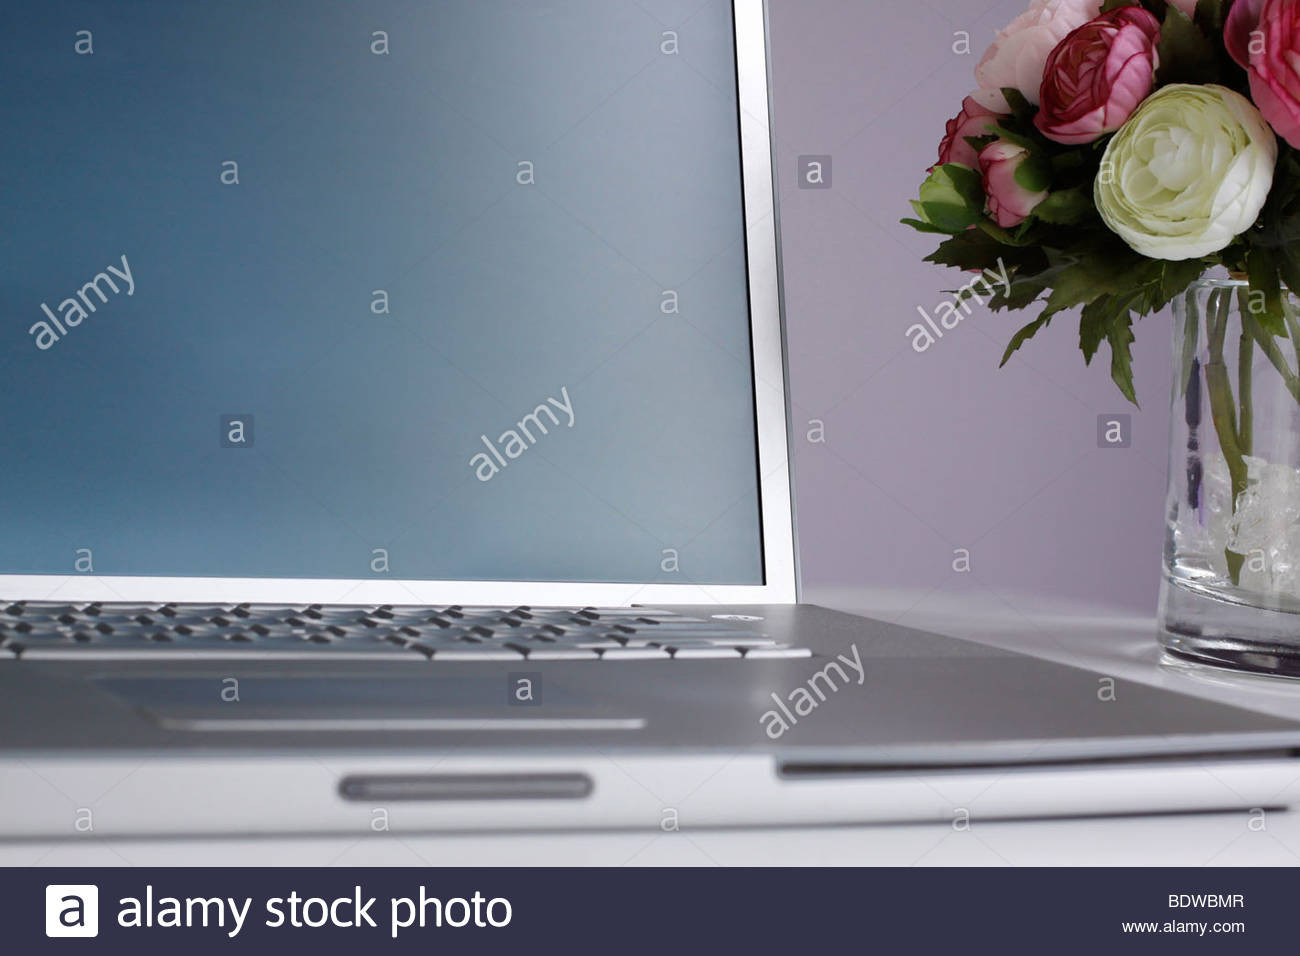 16 Awesome Silver Plated Vases for Flowers 2024 free download silver plated vases for flowers of silver vase pink flowers on stock photos silver vase pink flowers throughout silver laptop on a desk with a vase with pretty pink and white flowers next to